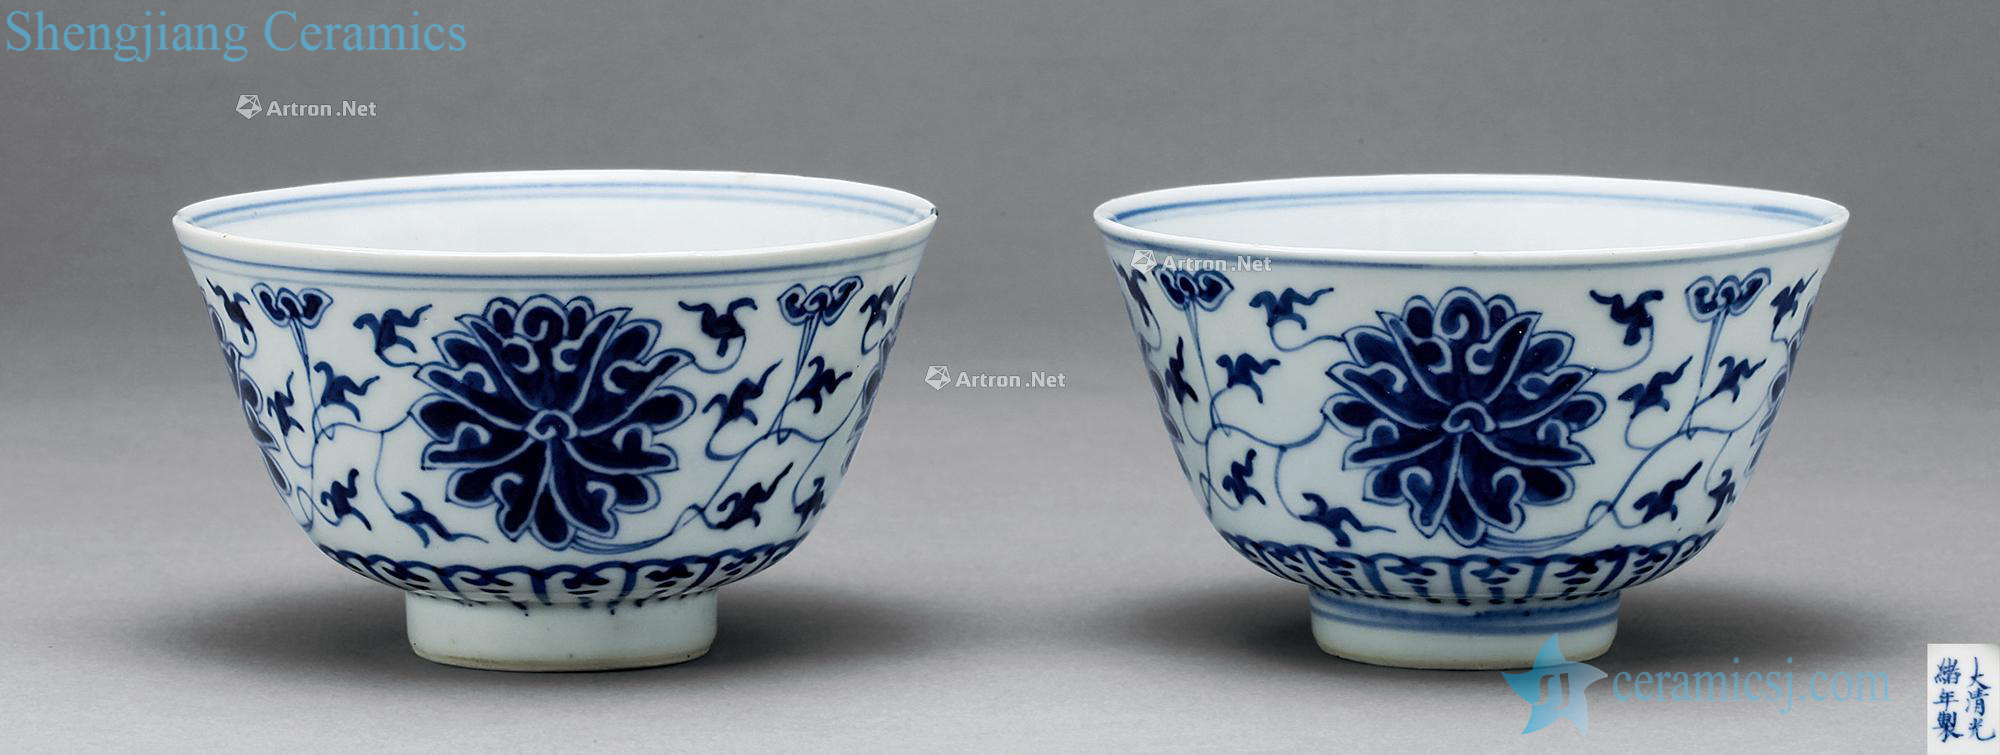 Qing guangxu Blue and white flower bowls bound branches (2)